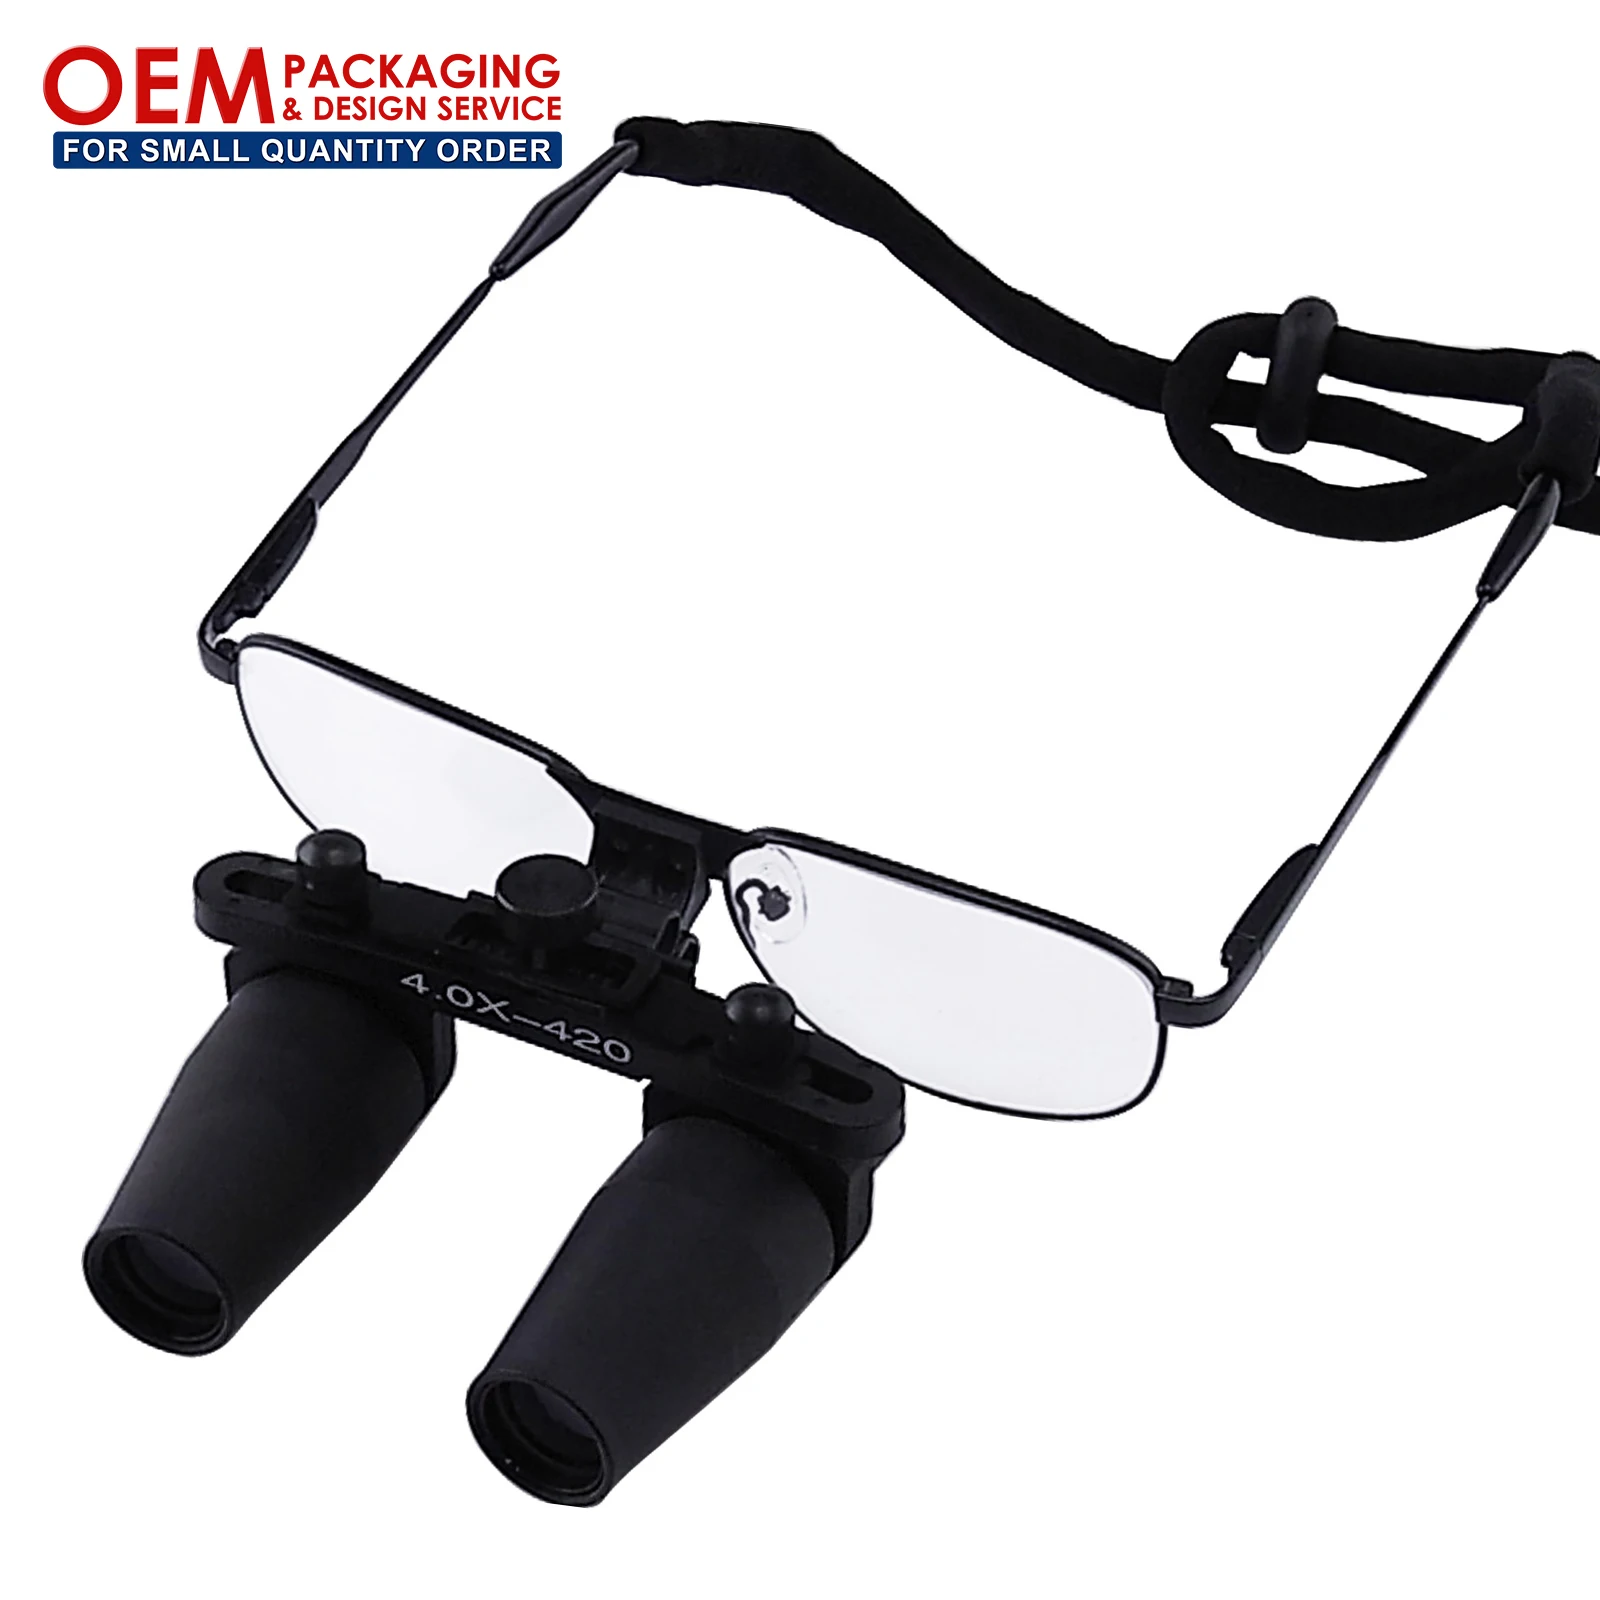 4.0X Magnification Dental Loupes, Prismatic Keplerian Style Nickel Alloy  Frame, 40mm Depth of Field+ 65mm Field of View+ 420mm Working Distance  Loupe